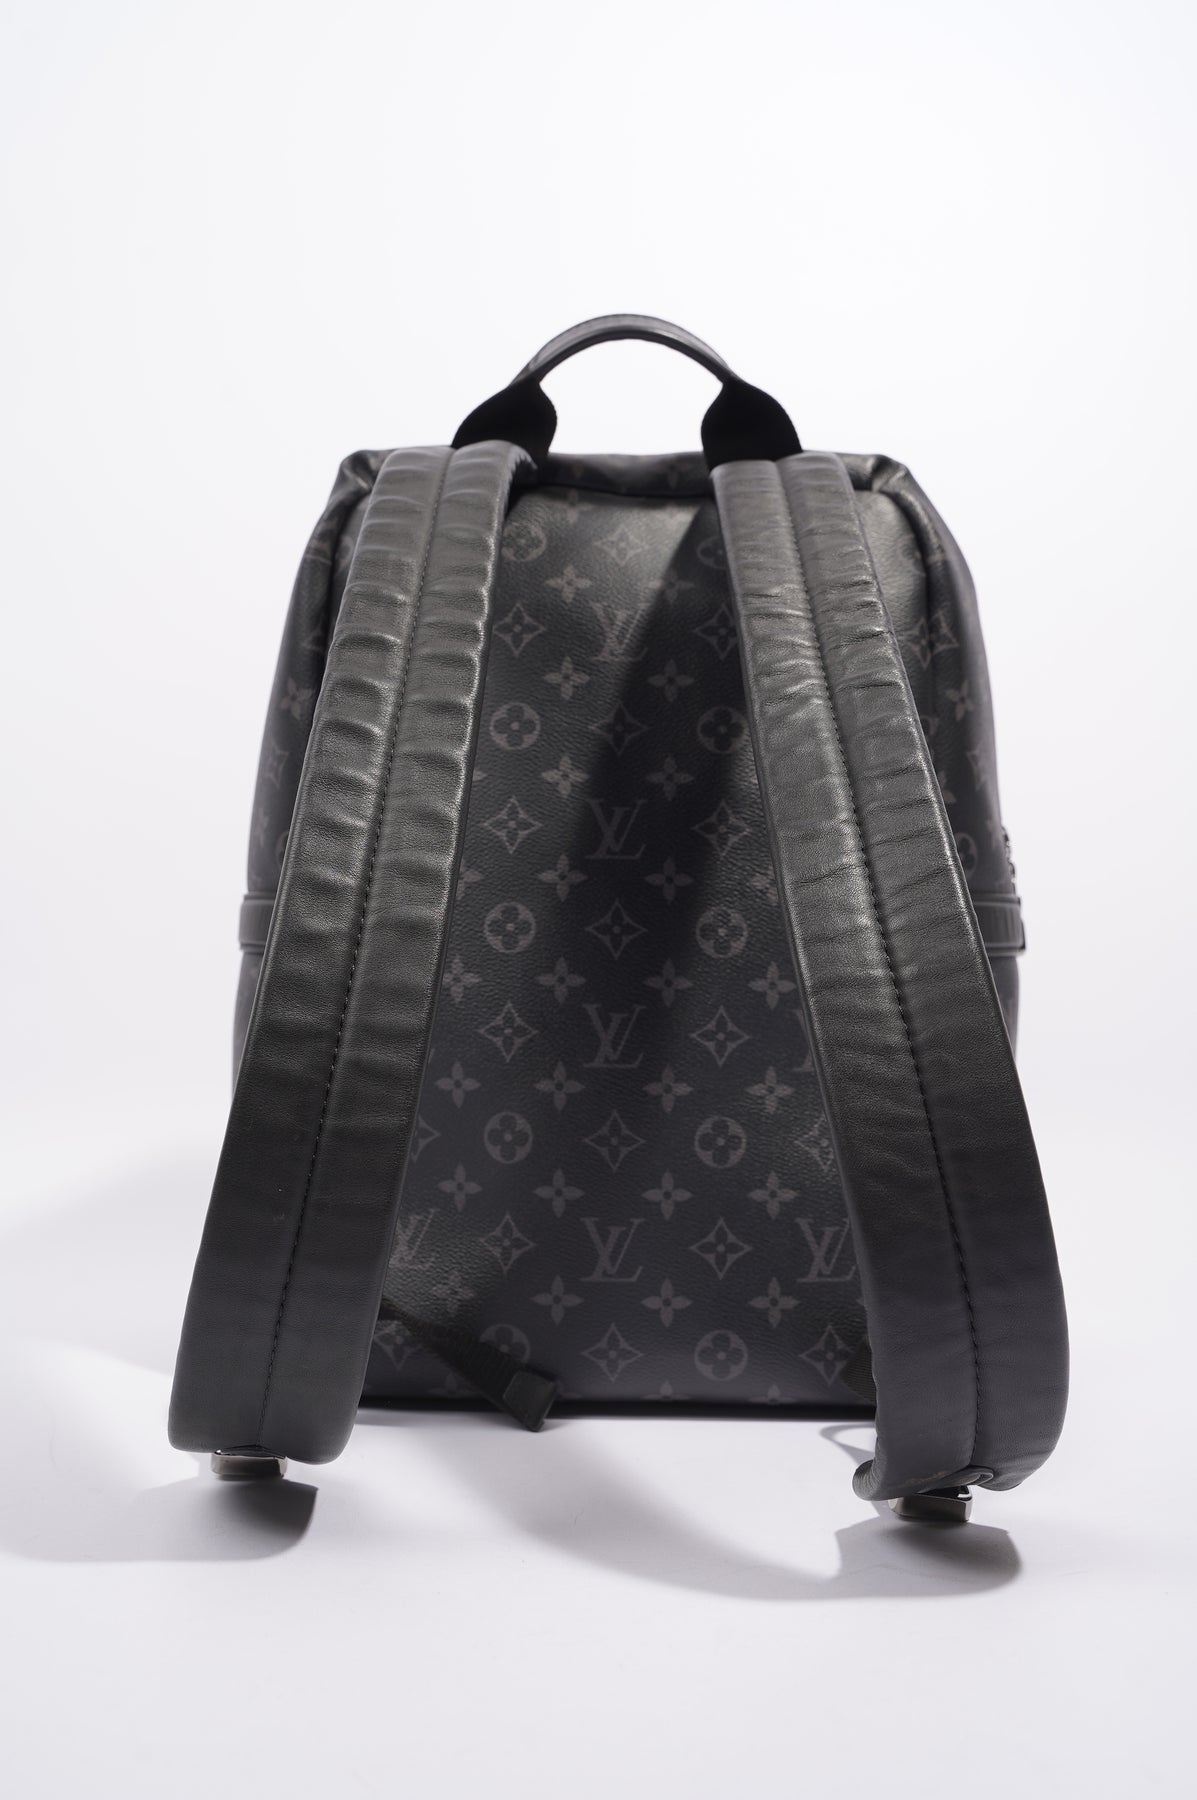 Louis Vuitton Zack Backpack in Monogram Eclipse from the Men's Fall Winter  2017 Collection by Kim Jone…